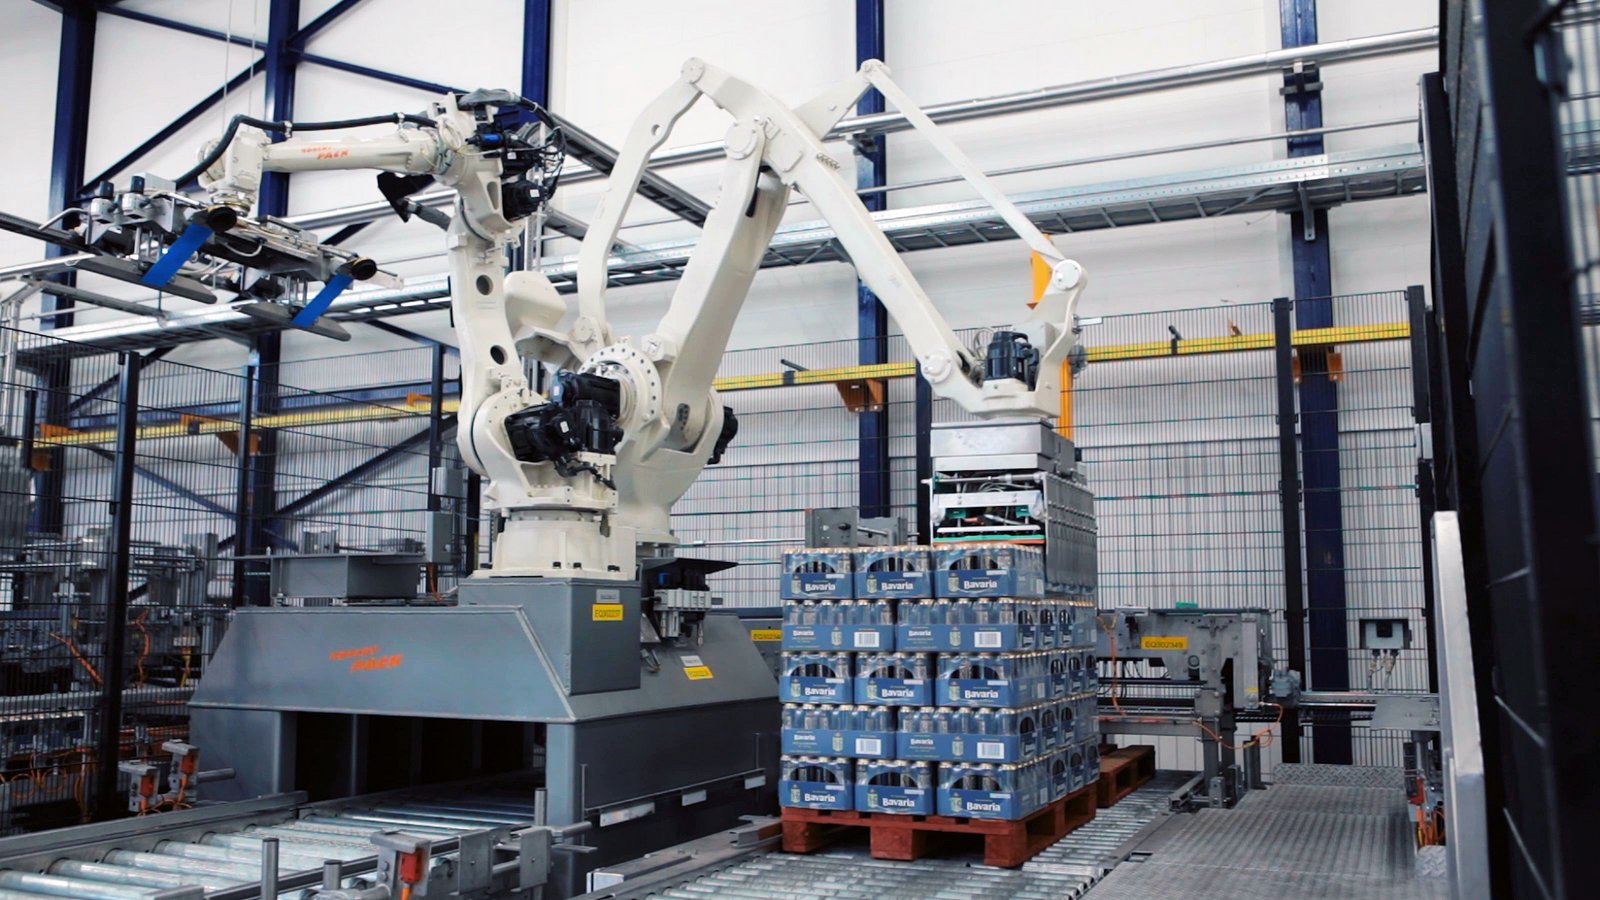 Robertpack-robot-palletising-system-for-cans-at-Swinkels-in-Lieshout